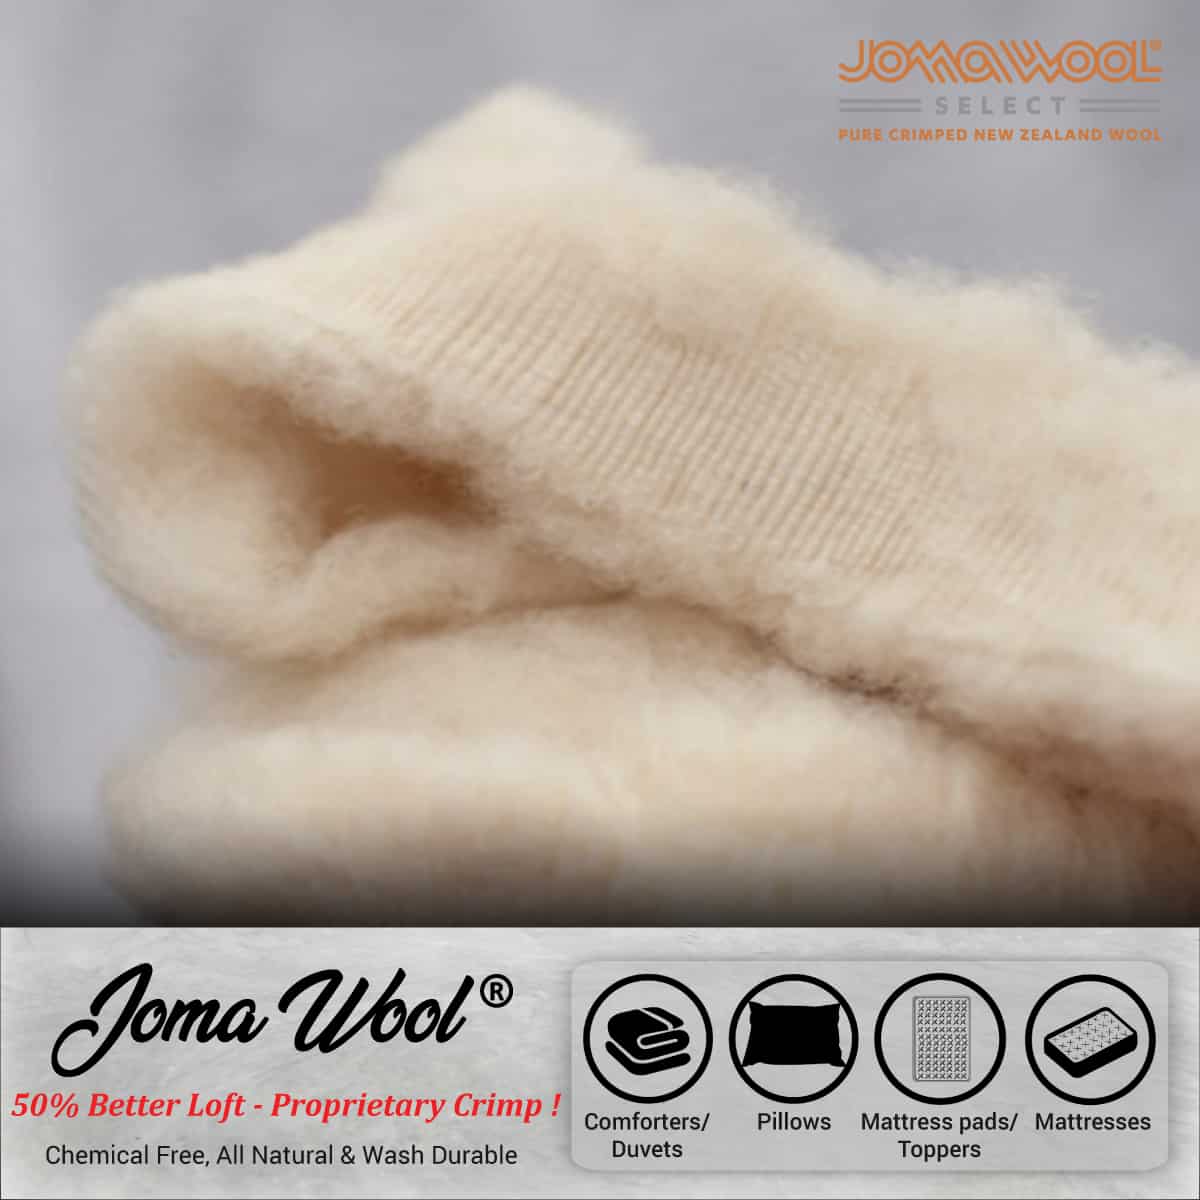 Joma Wool: The Go-To Brand for High-Quality Wool Sleep Products